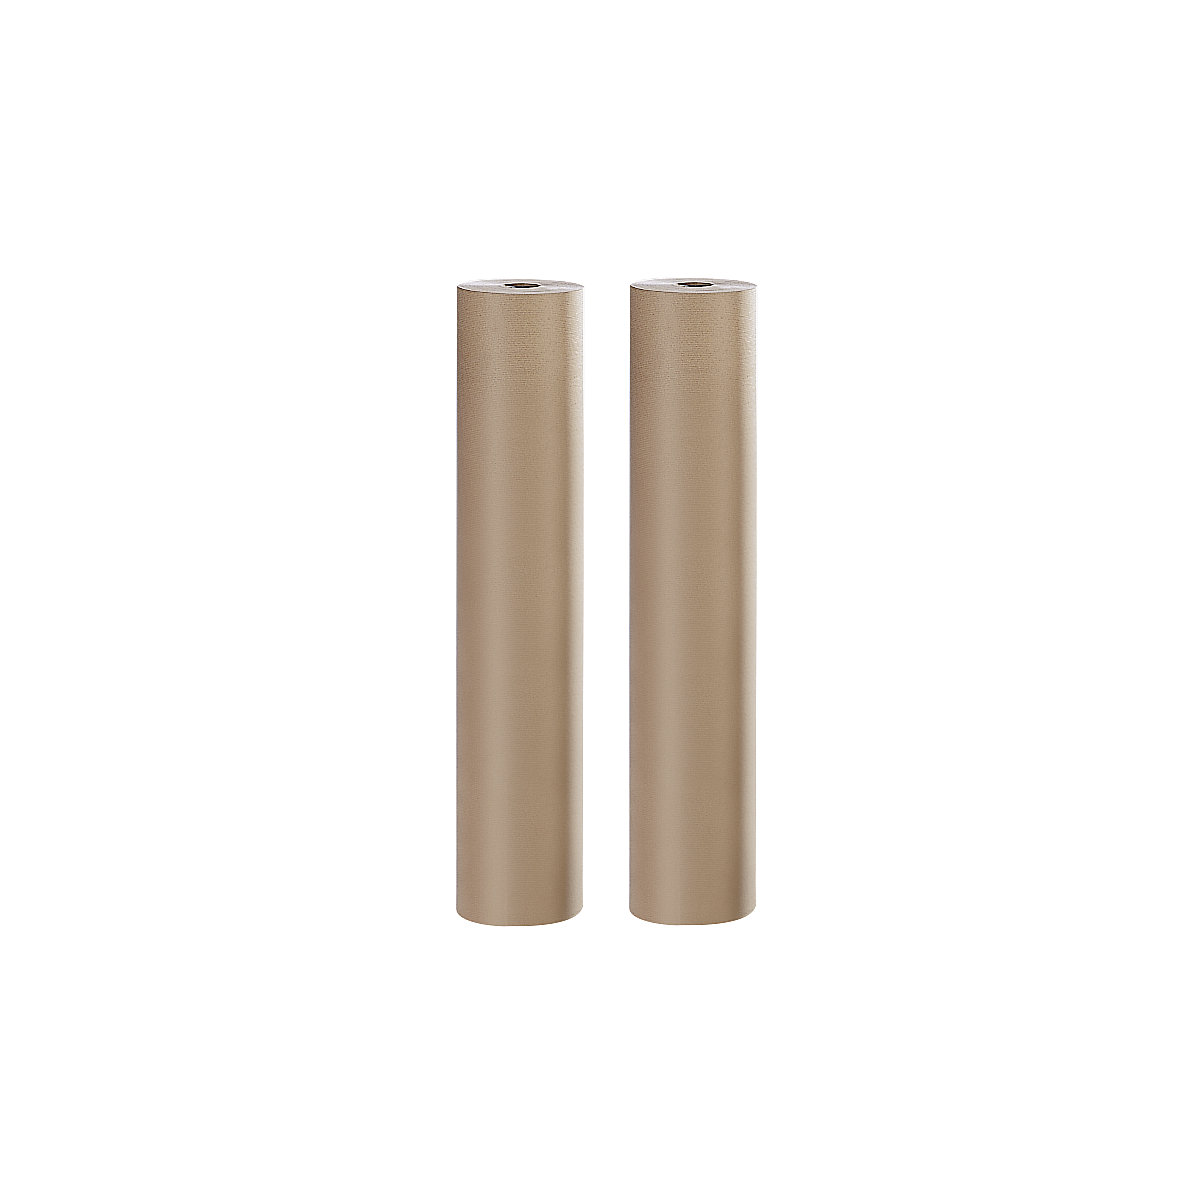 Packing paper, 80 g/m², Secare roll, 1000 mm wide, pack of 2 rolls-1